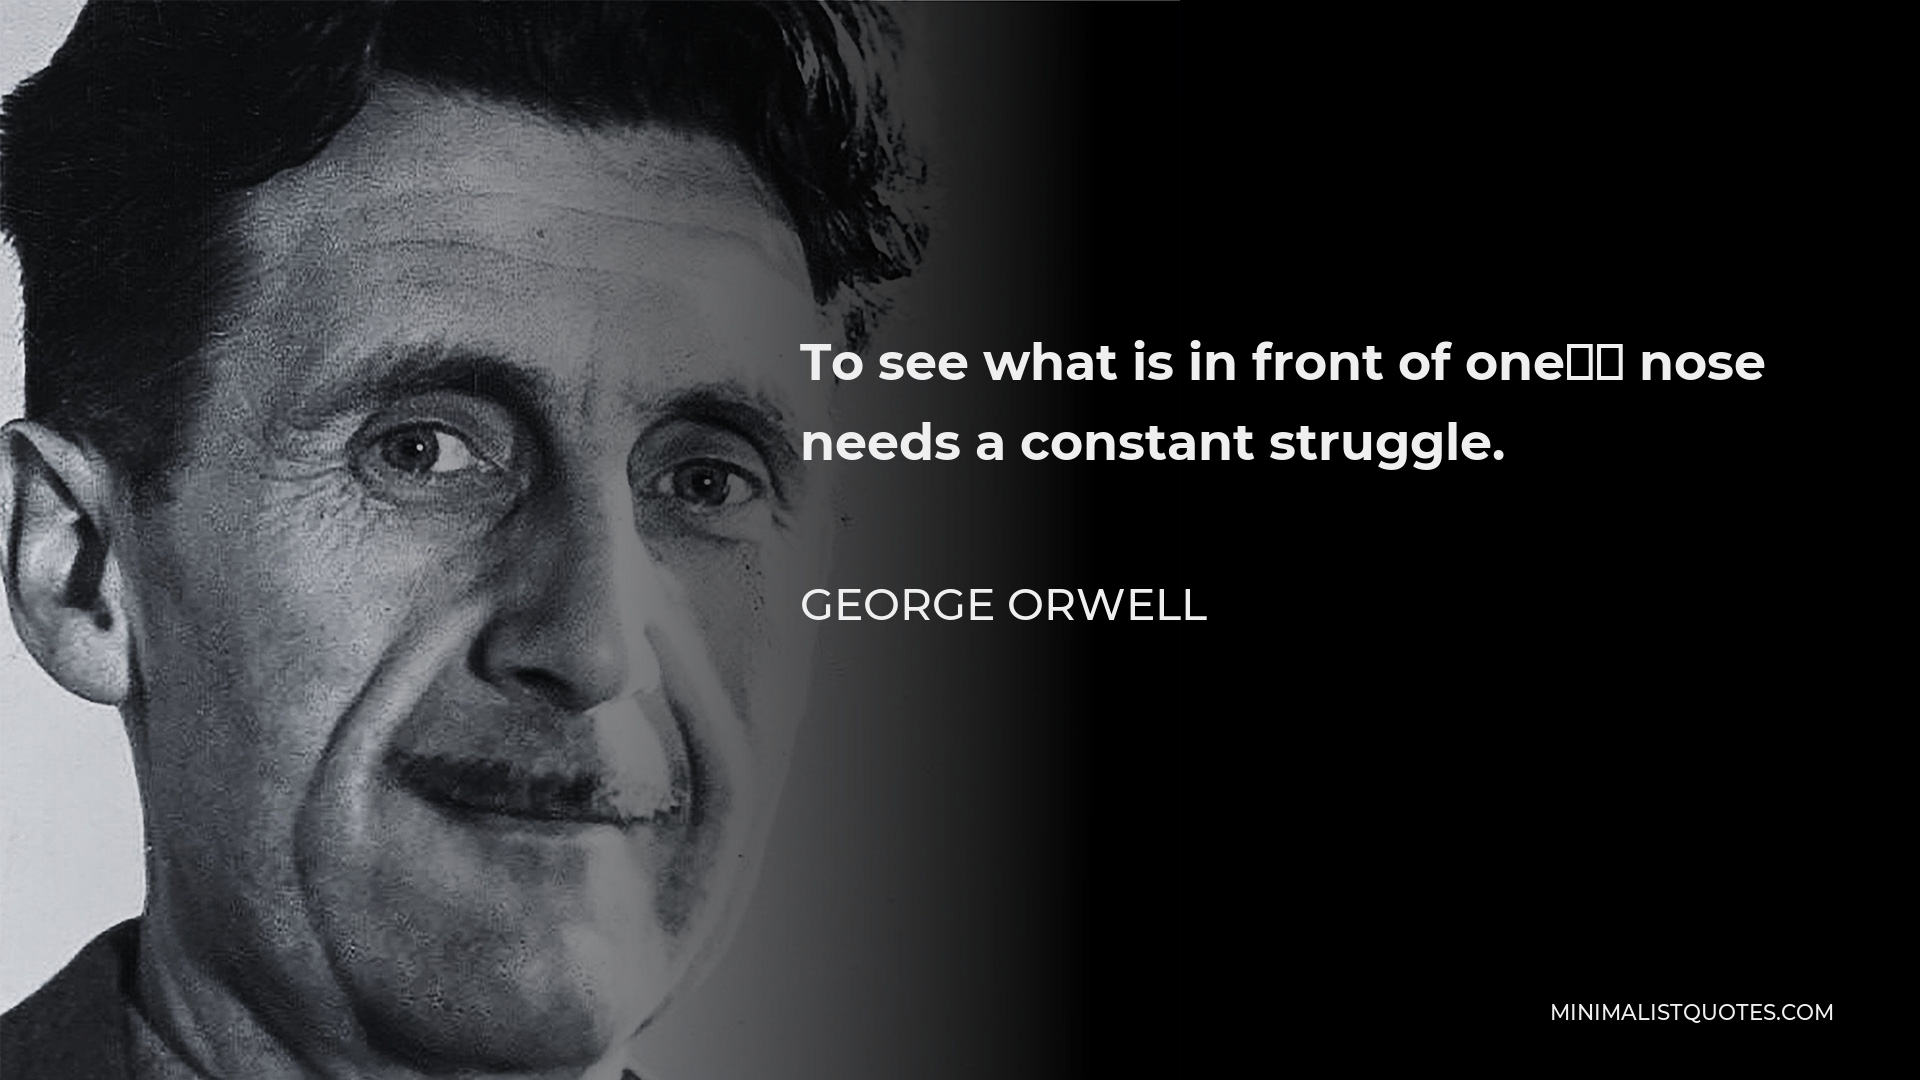 George Orwell Quote - To see what is in front of one’s nose needs a constant struggle.